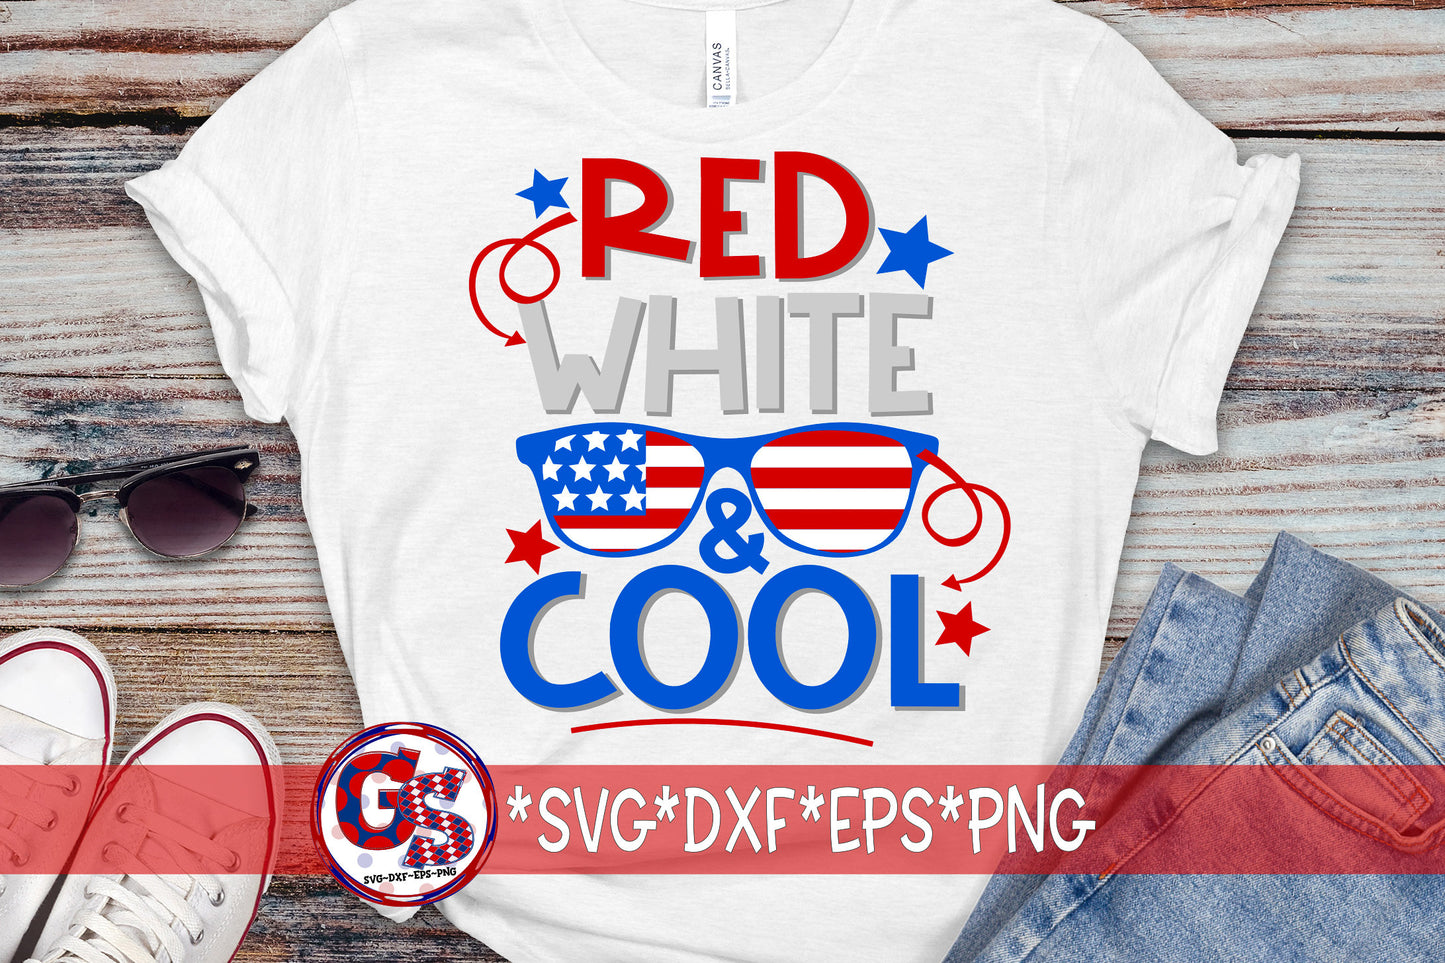 Red White & Cool SVG | July 4th SvG | Red White and Cool svg, dxf, eps, png. 4th of July SvG | July 4th | Instant Download Cut Files.